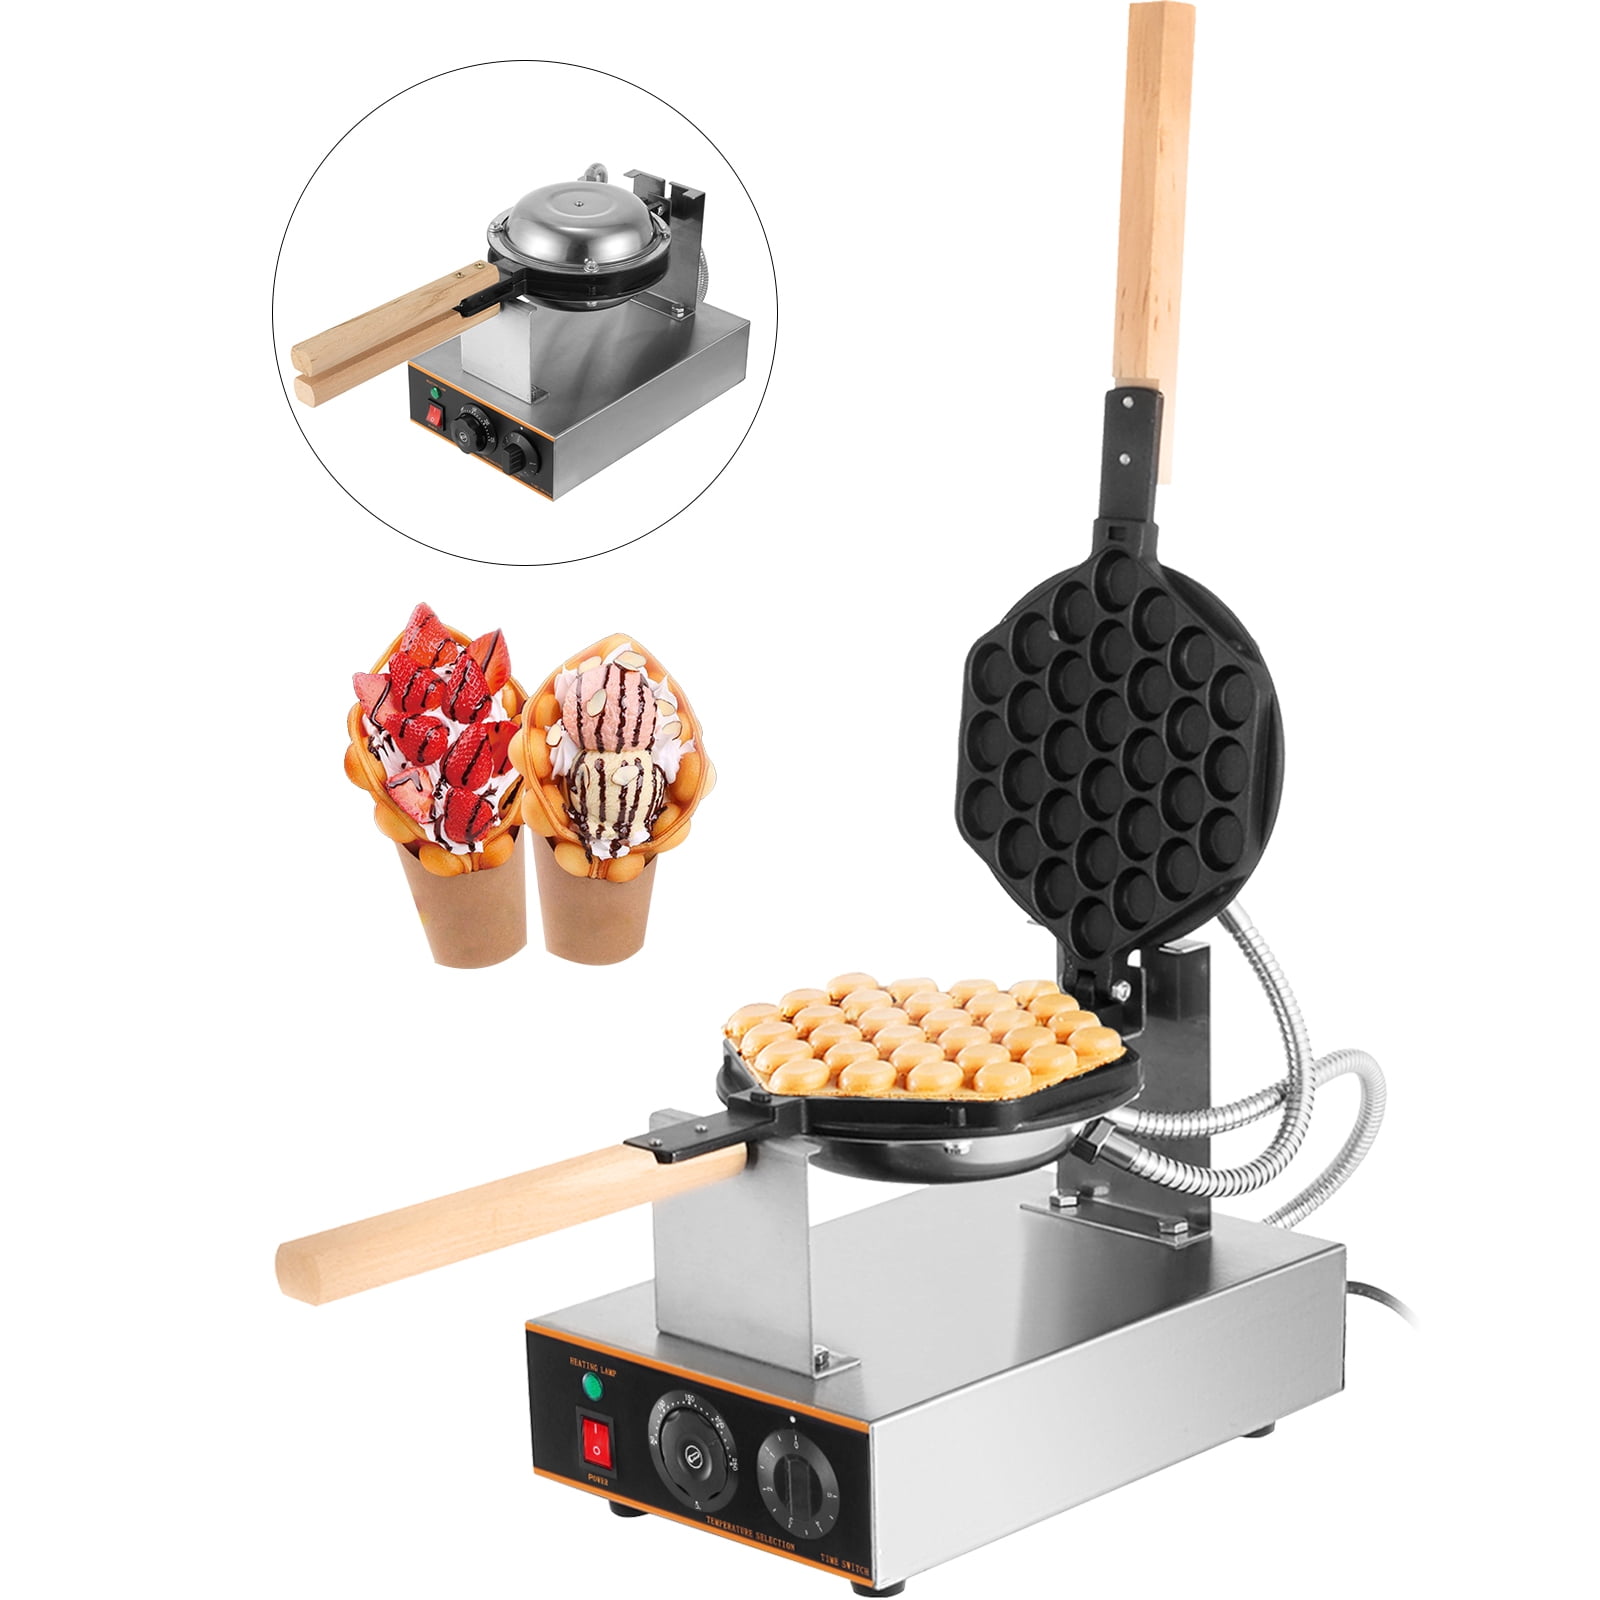  AeKeatDa Egg Waffle Maker Cake Maker with Silicone Brush for  Home, kitchen, DIY,Bakeware and etc,DIY Bubble Waffle Maker,Non-Stick: Home  & Kitchen